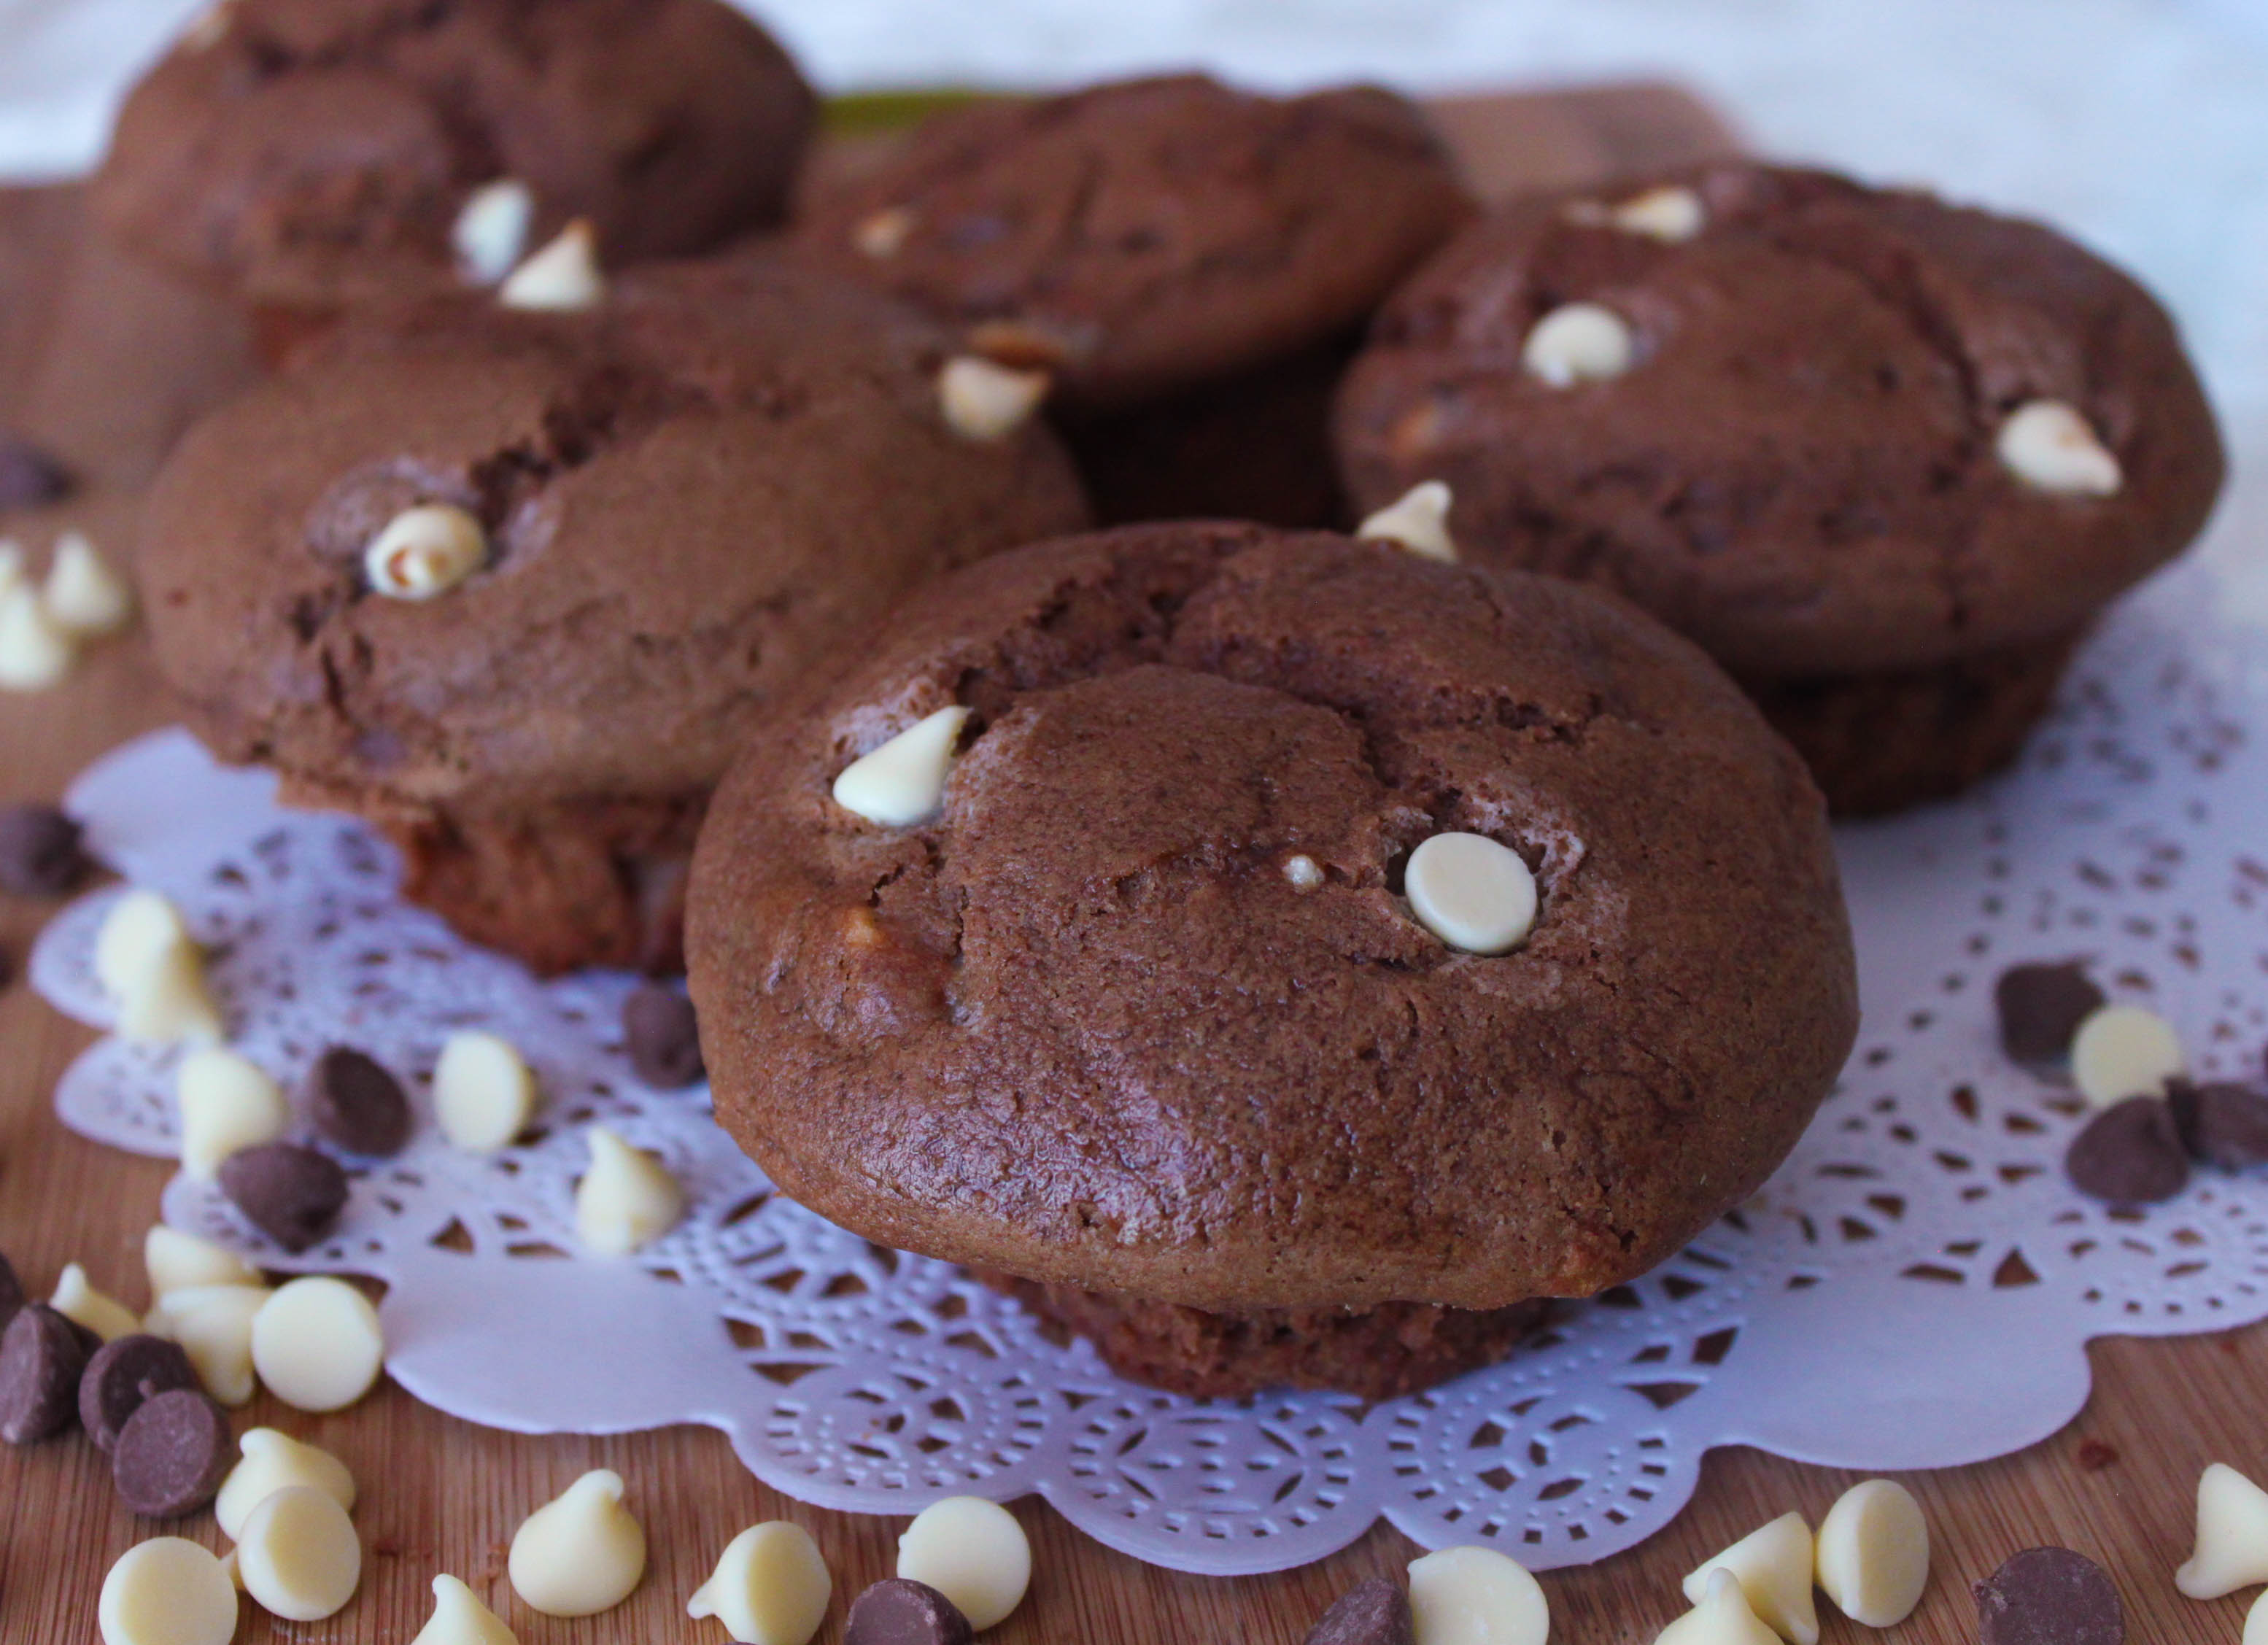 Triple chocolate muffins - soft, delicious and easy to make.